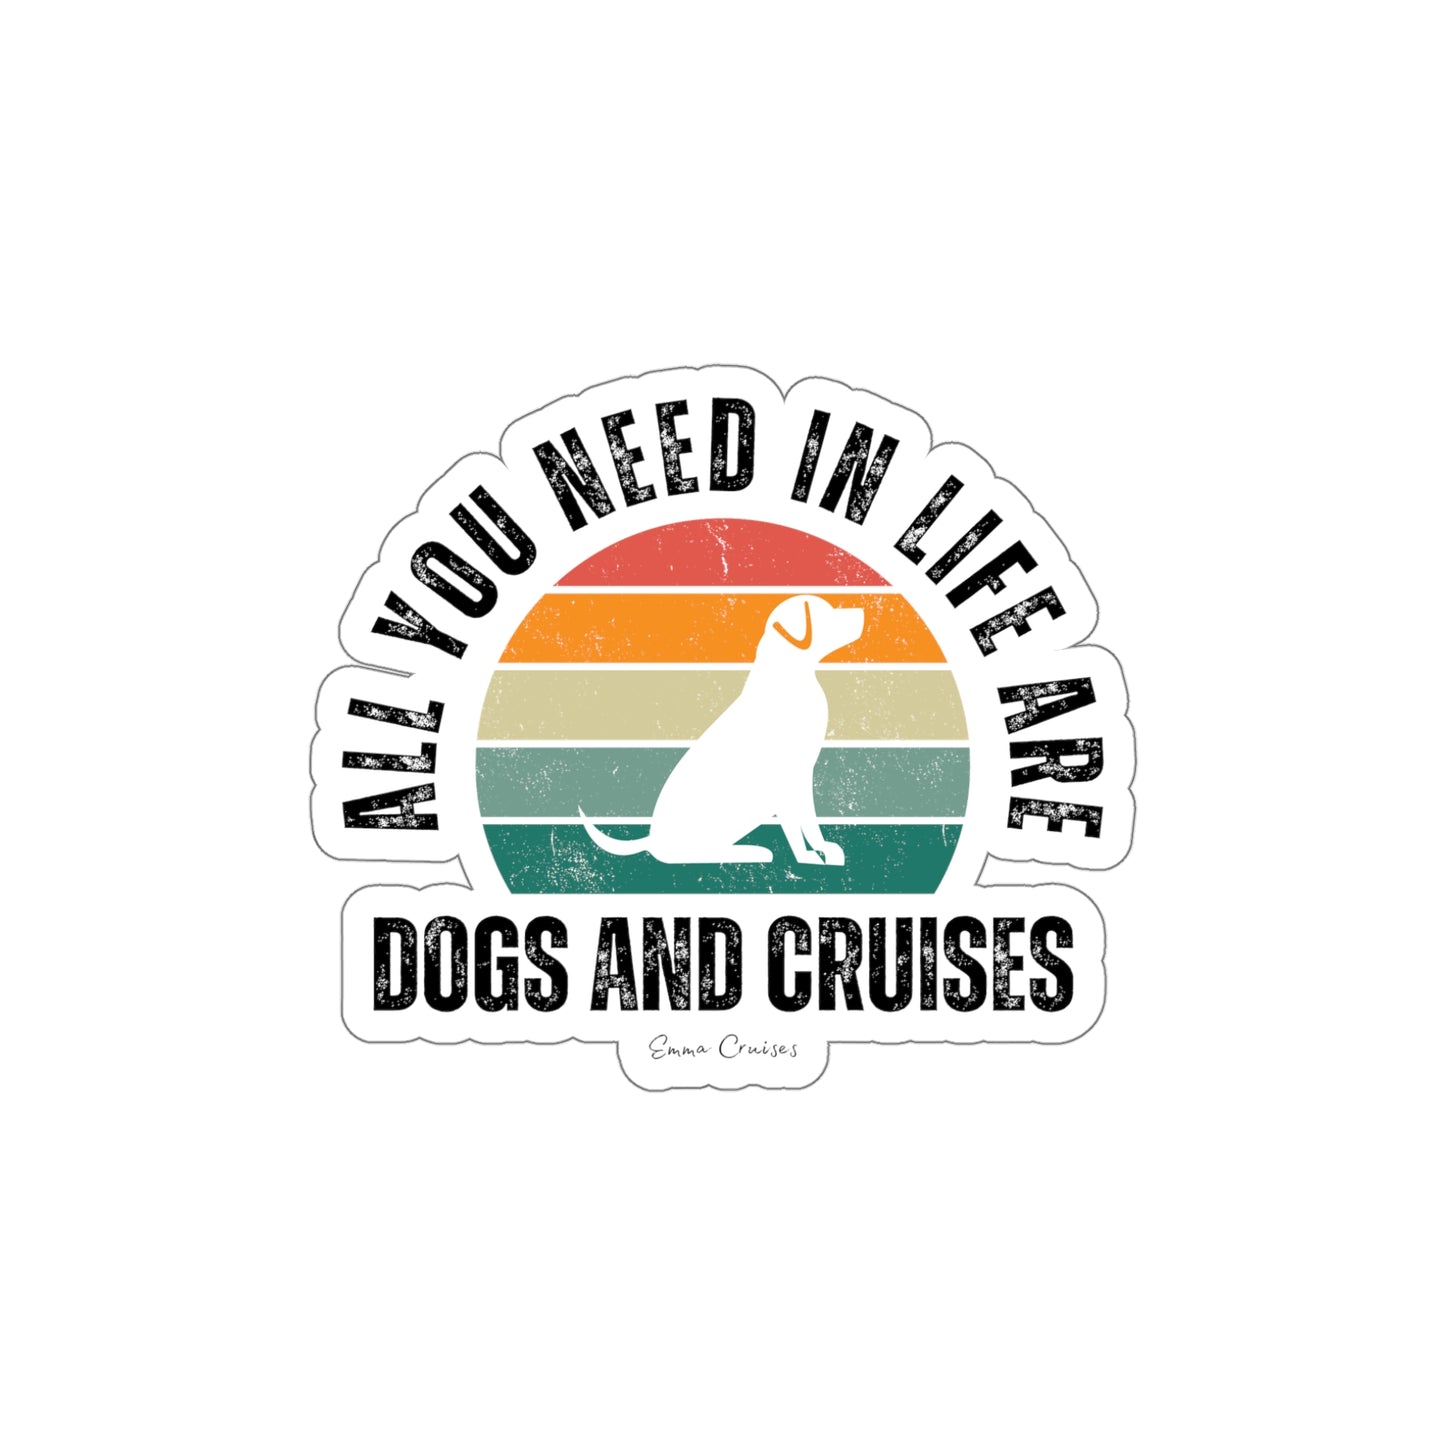 Dogs and Cruises - Die-Cut Stickers